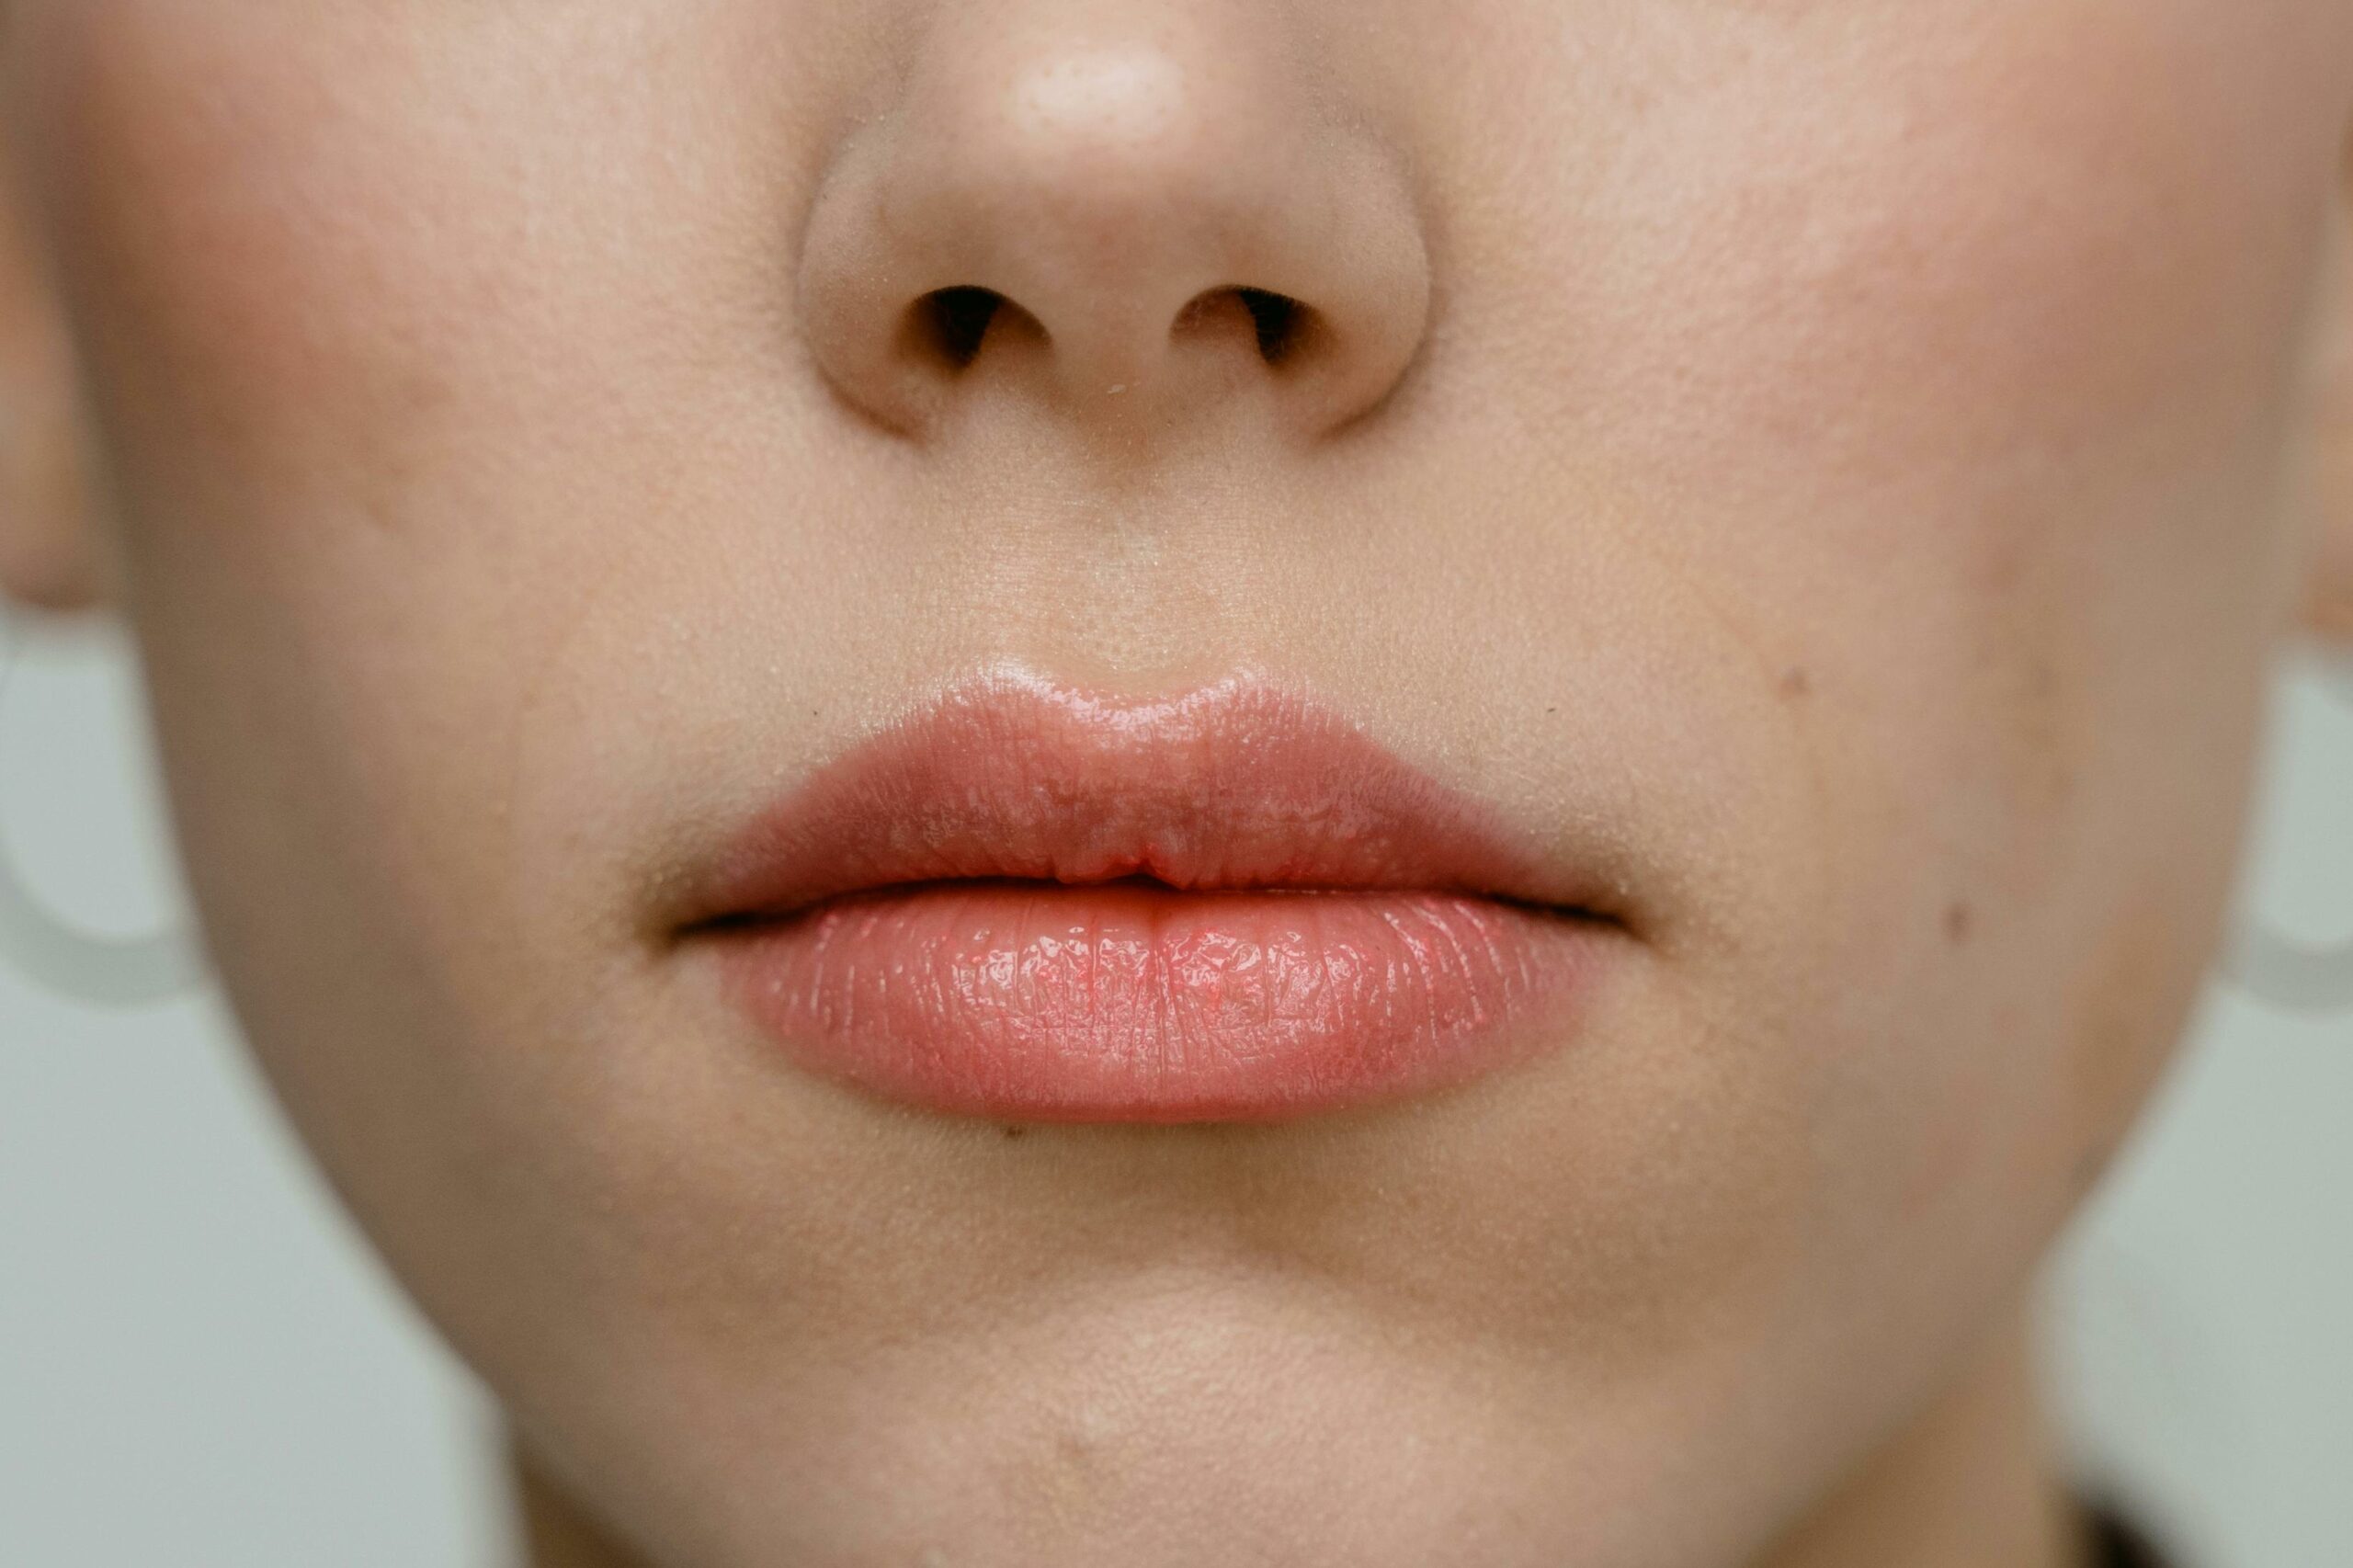 Authentication based on lips and facial movements